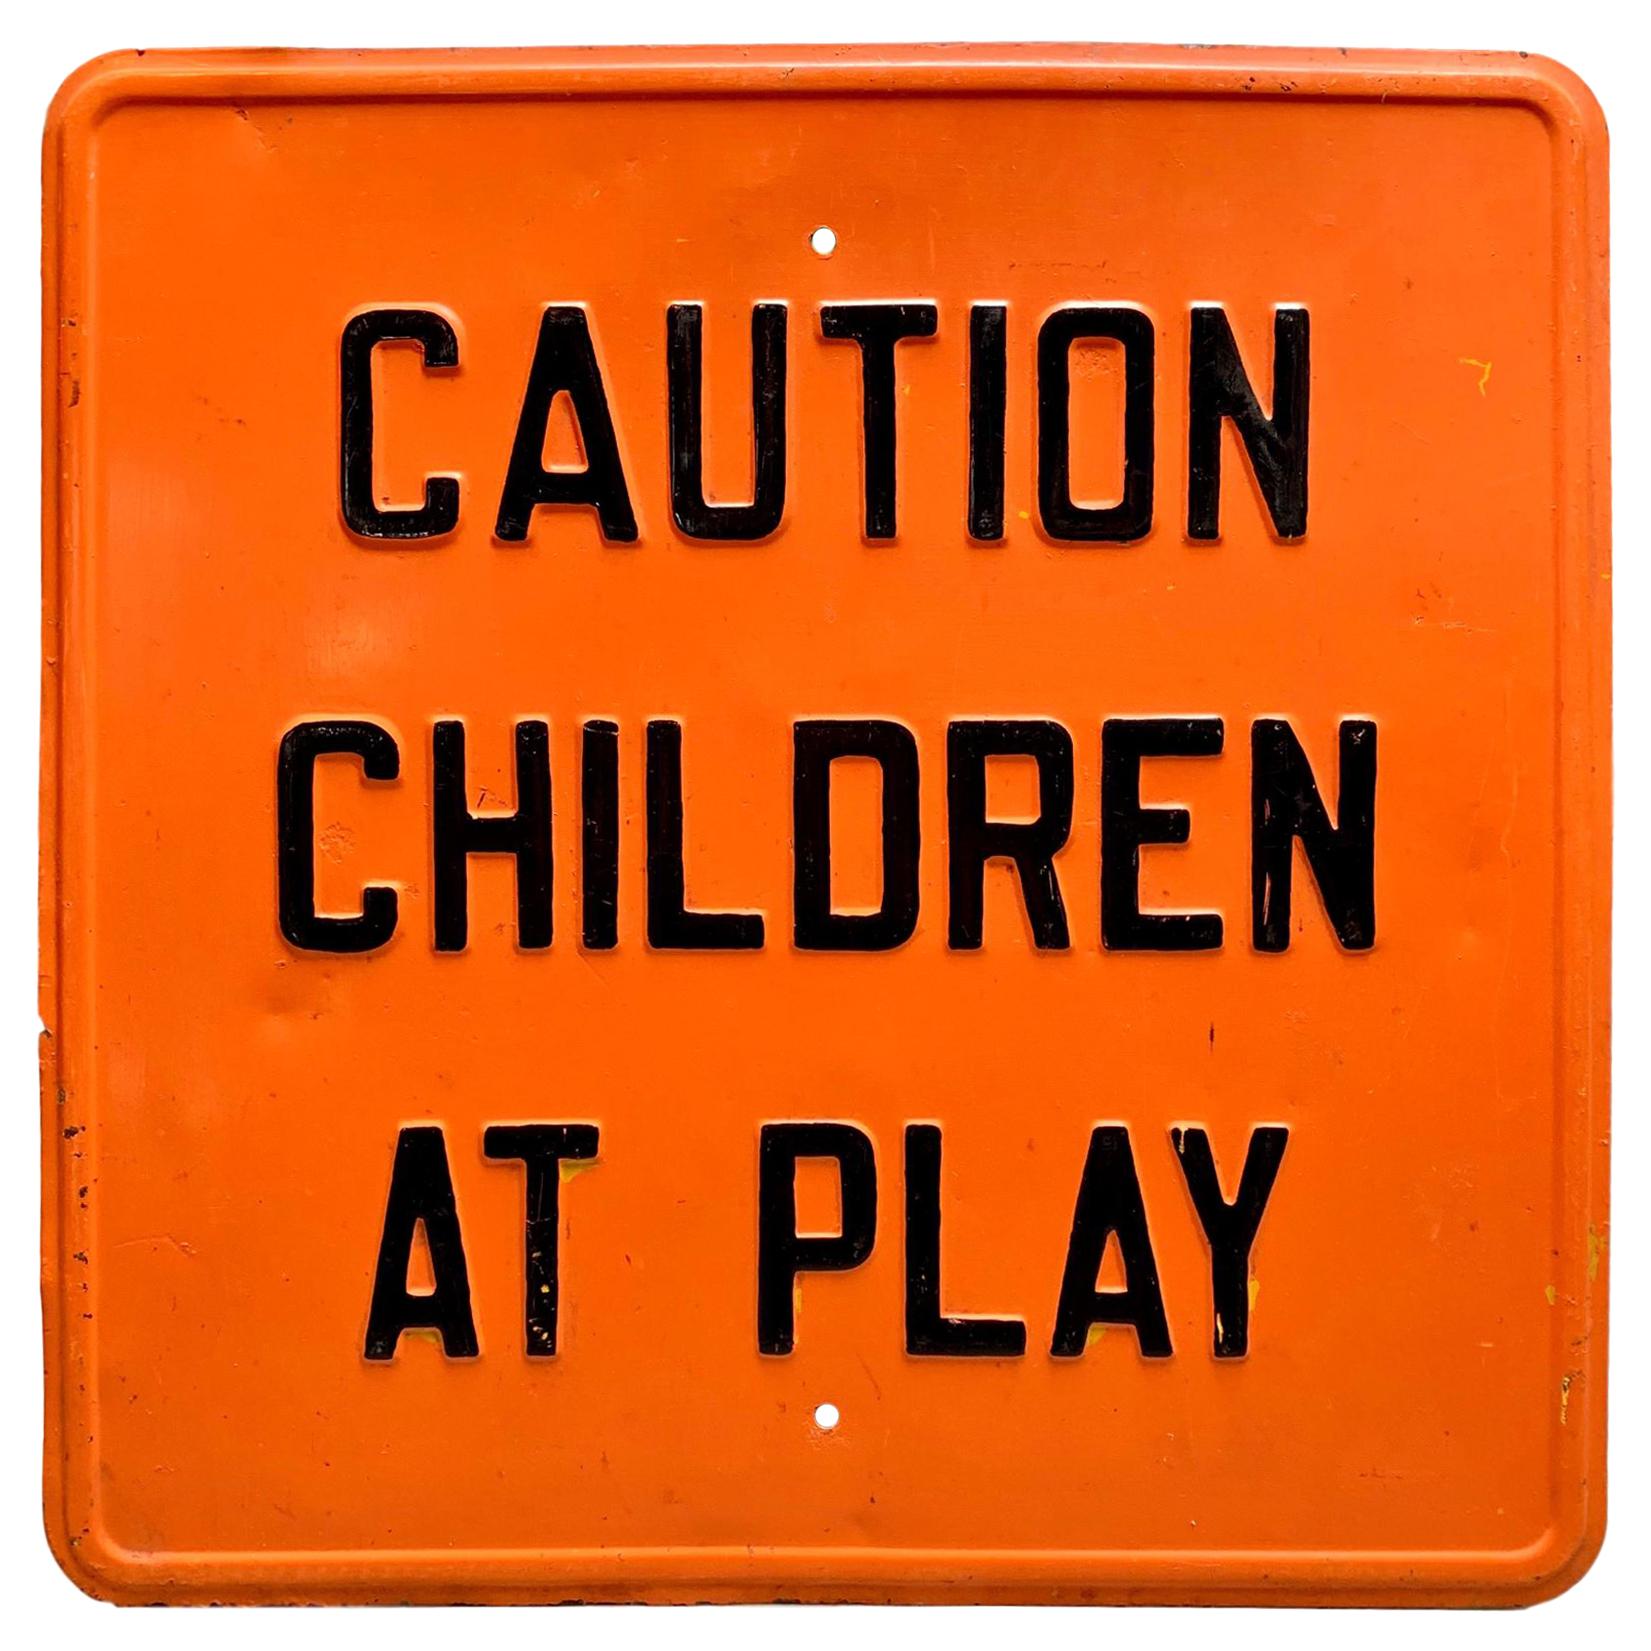 Vintage 'Caution - Children at Play' Metal Road Sign